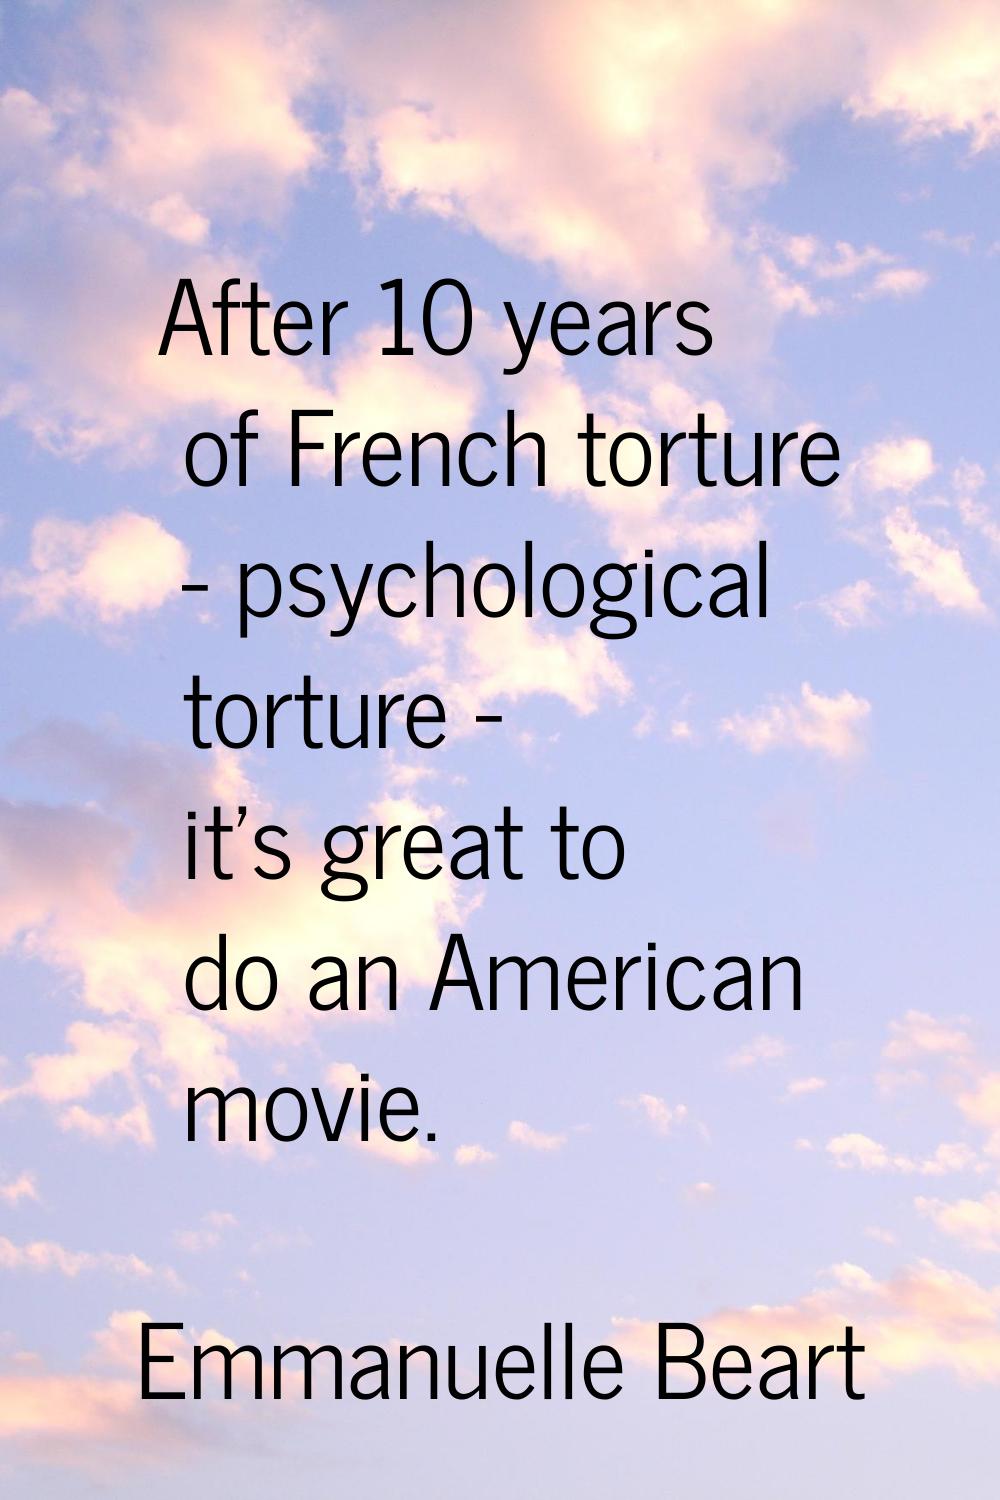 After 10 years of French torture - psychological torture - it's great to do an American movie.